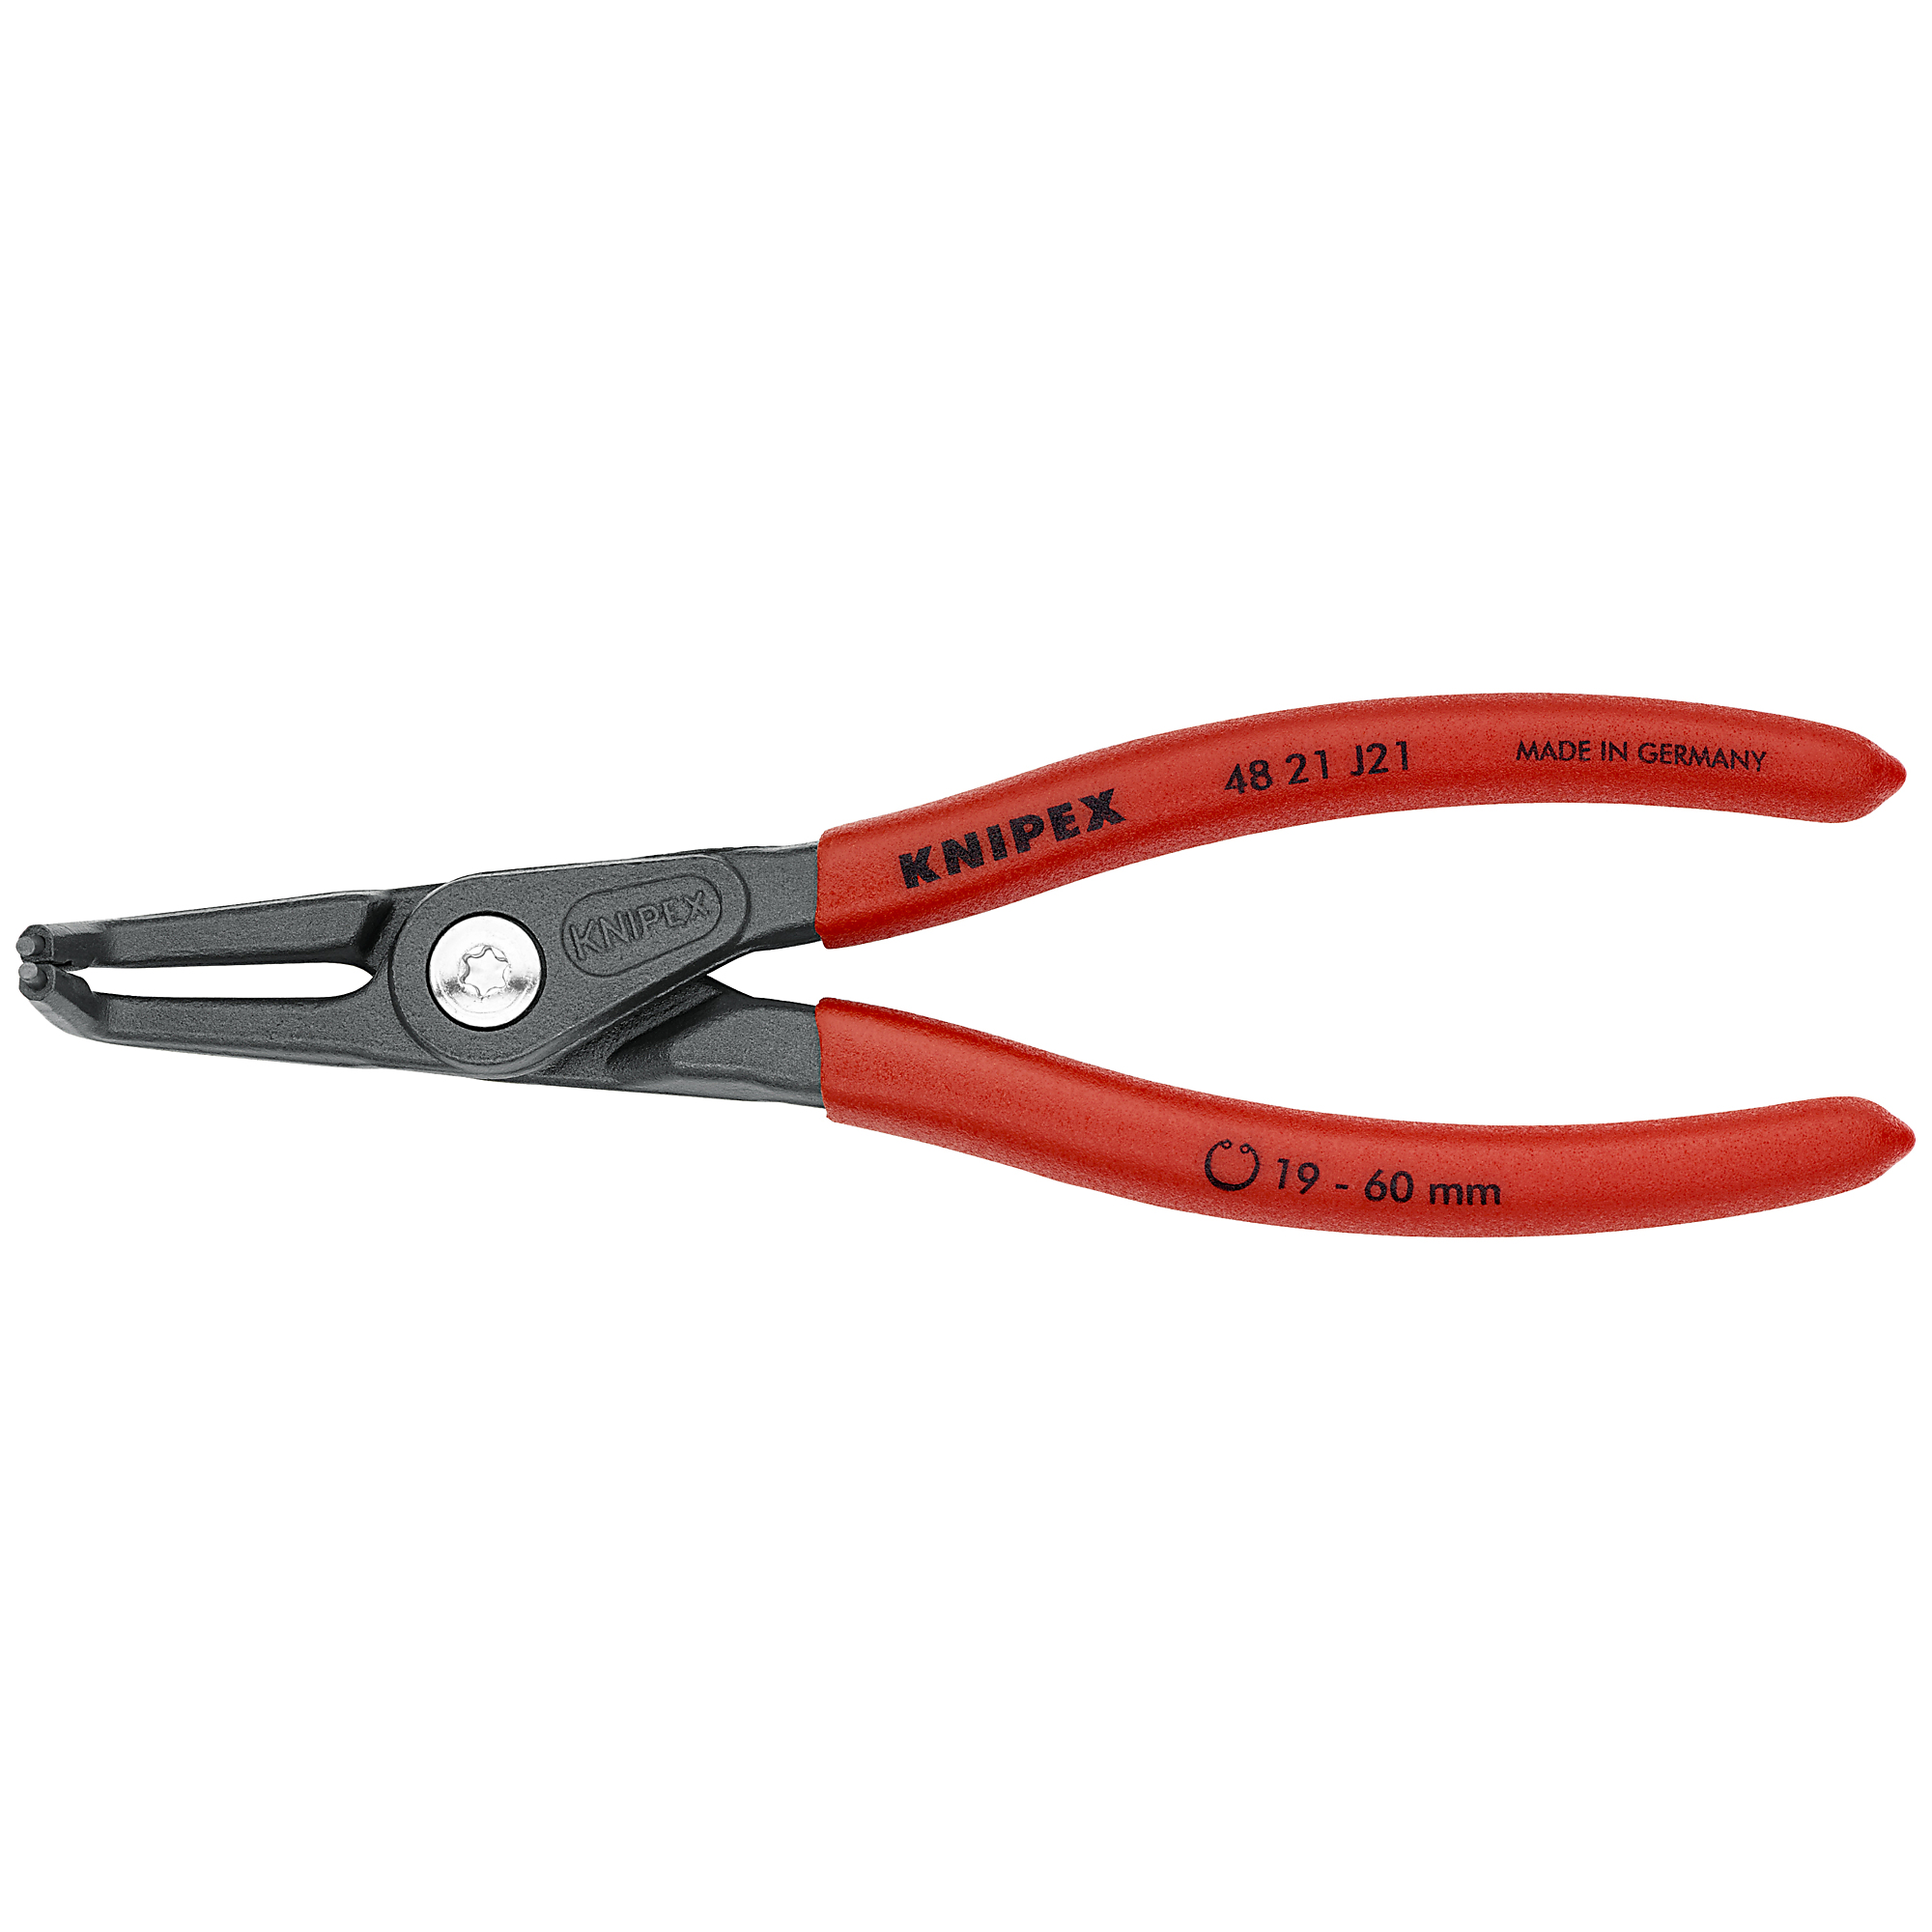 KNIPEX, Int 90Â° Prec. Snap Ring Pliers, 5/64 tip, 6.5Inch, Pieces (qty.) 1 Material Steel, Model 48 21 J21